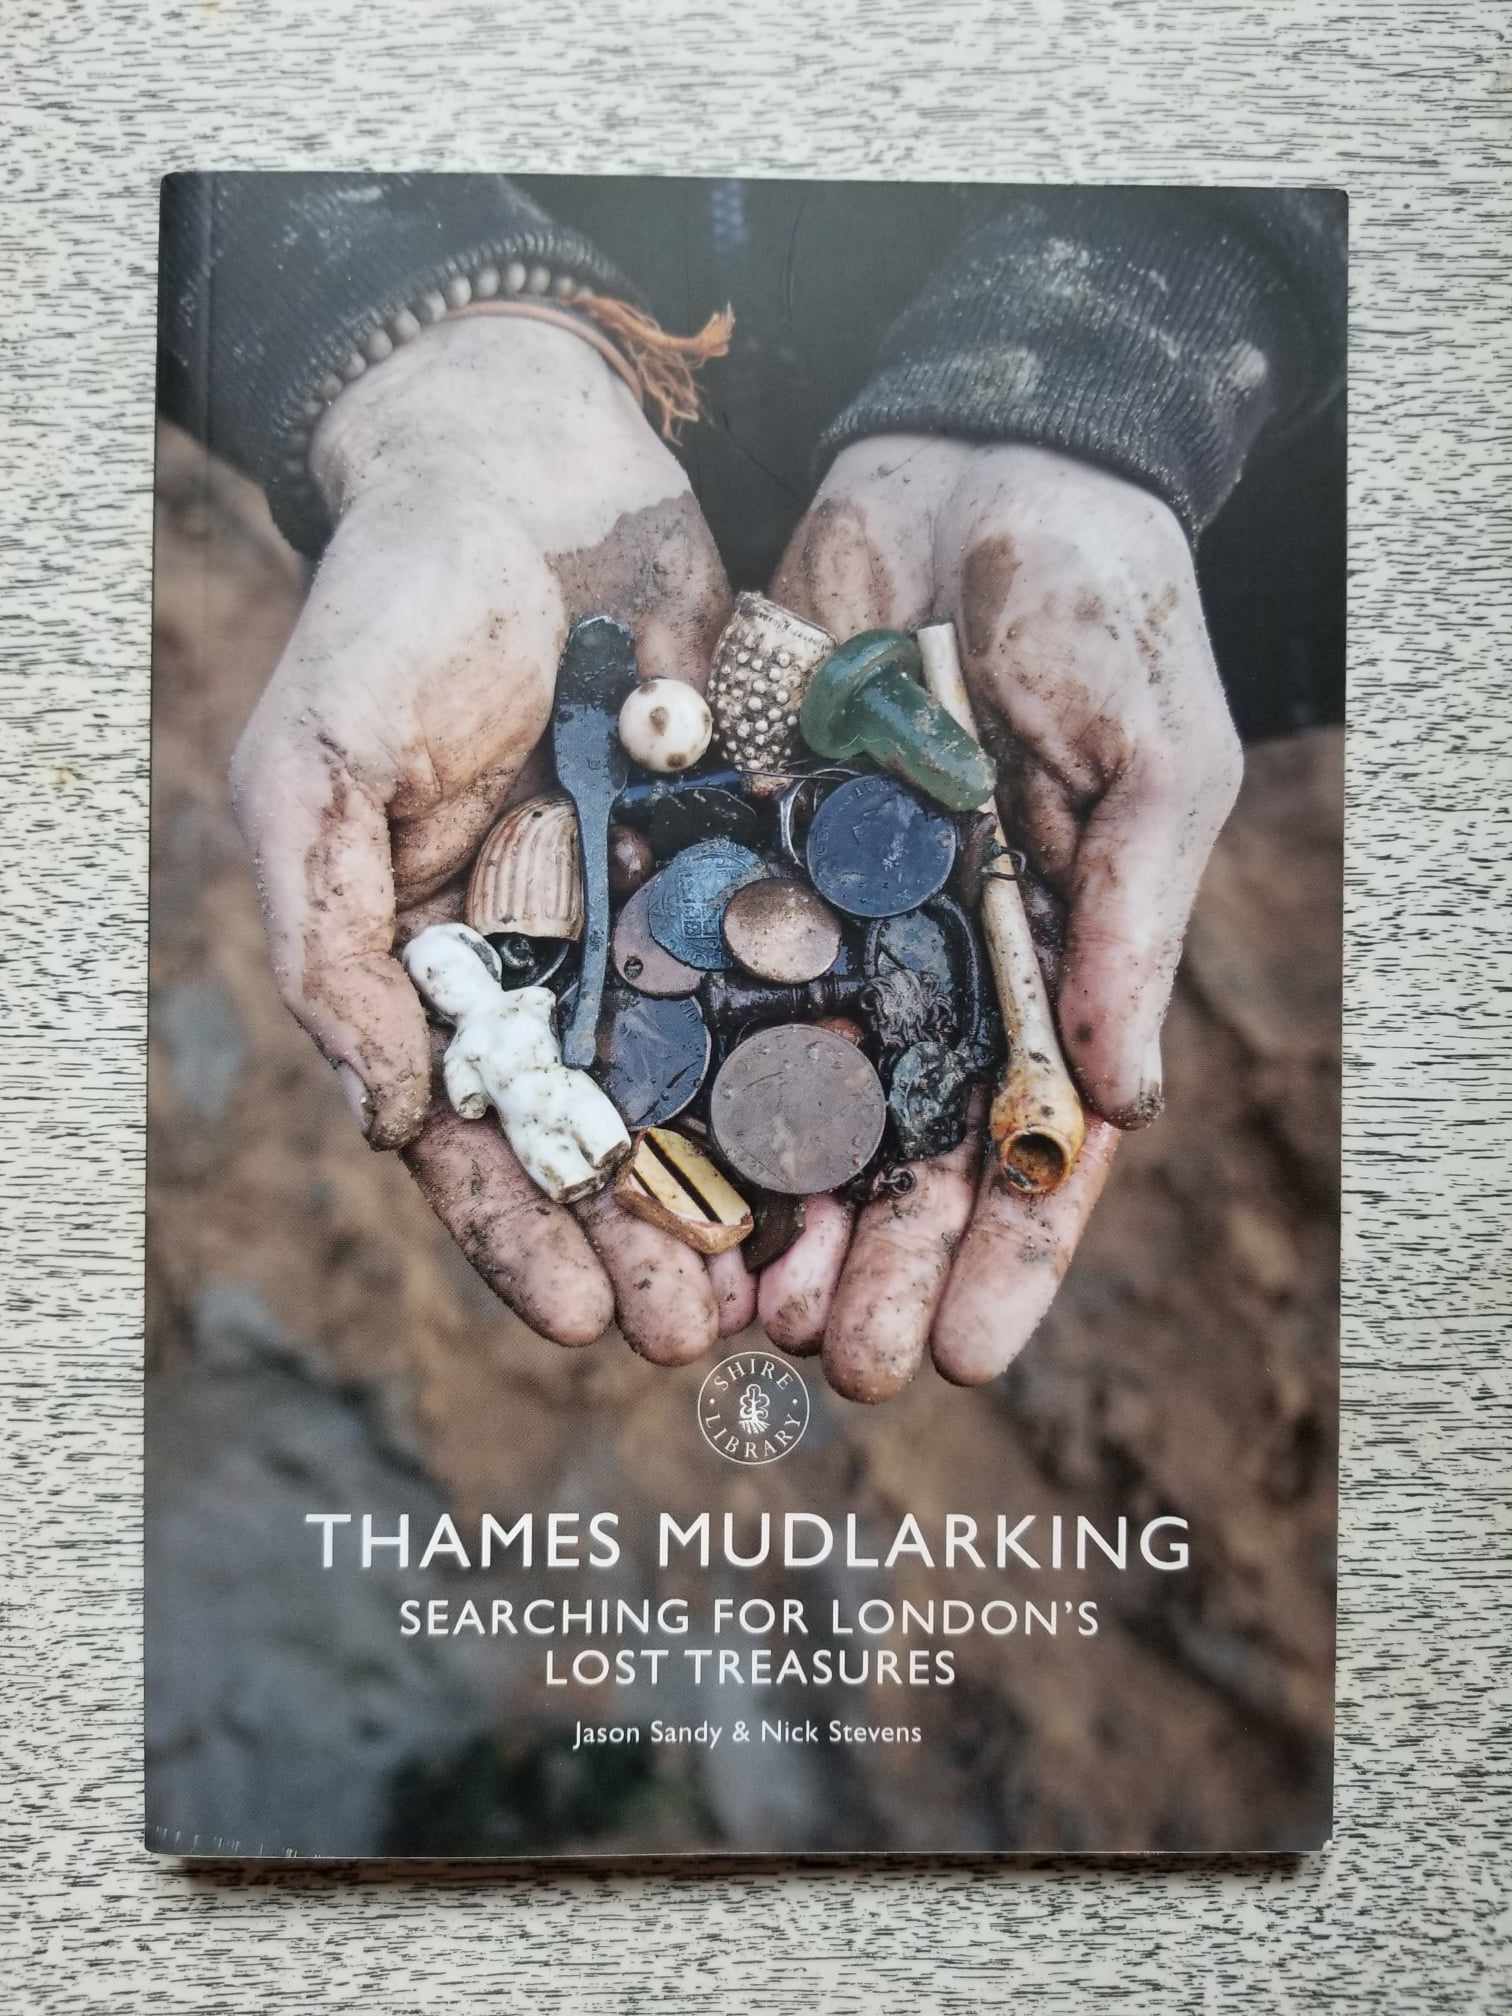 Thames Mudlarking: Searching for London's Lost Treasures by Jason Sandy and Nick Stevens